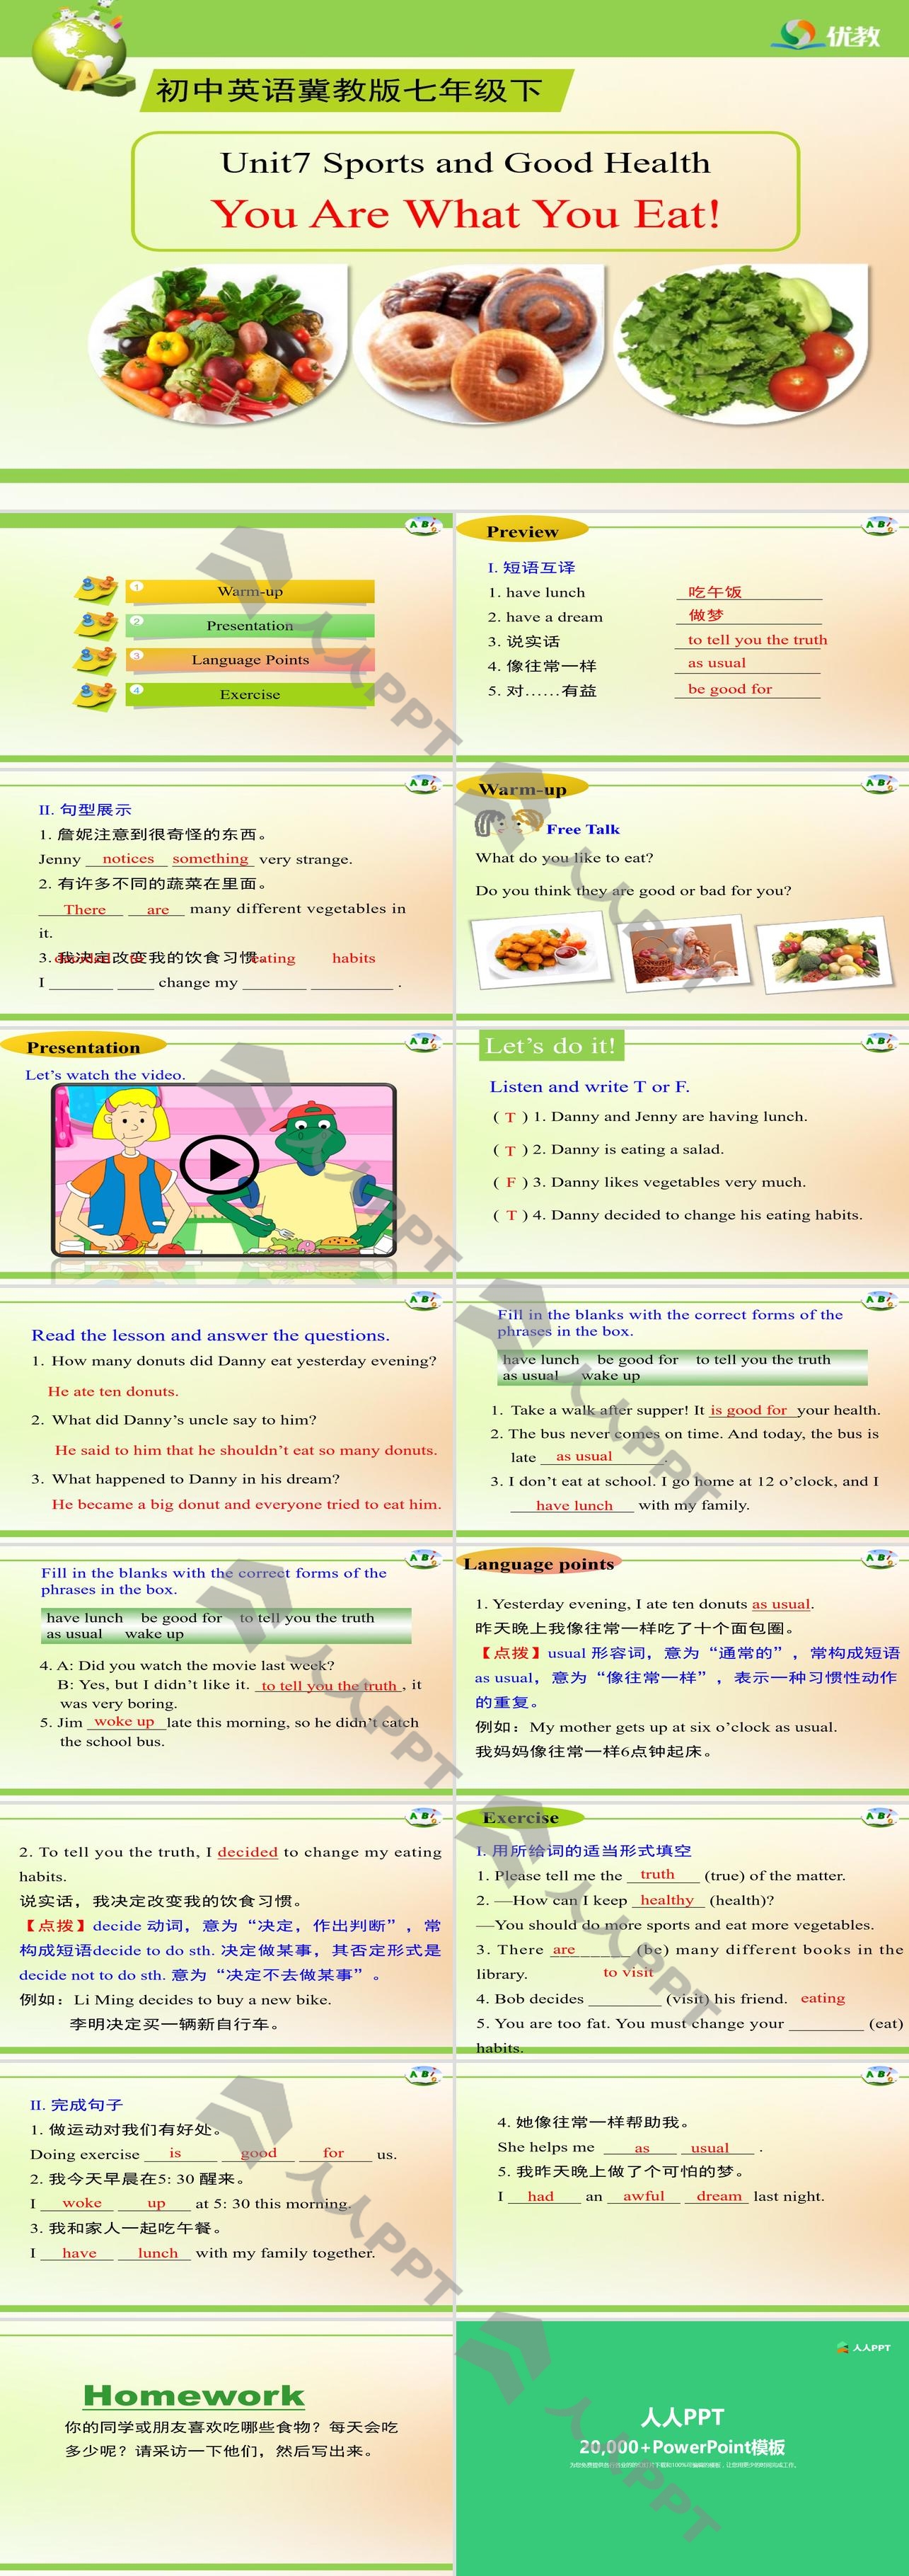 《You Are What You Eat!》Sports and Good Health PPT长图